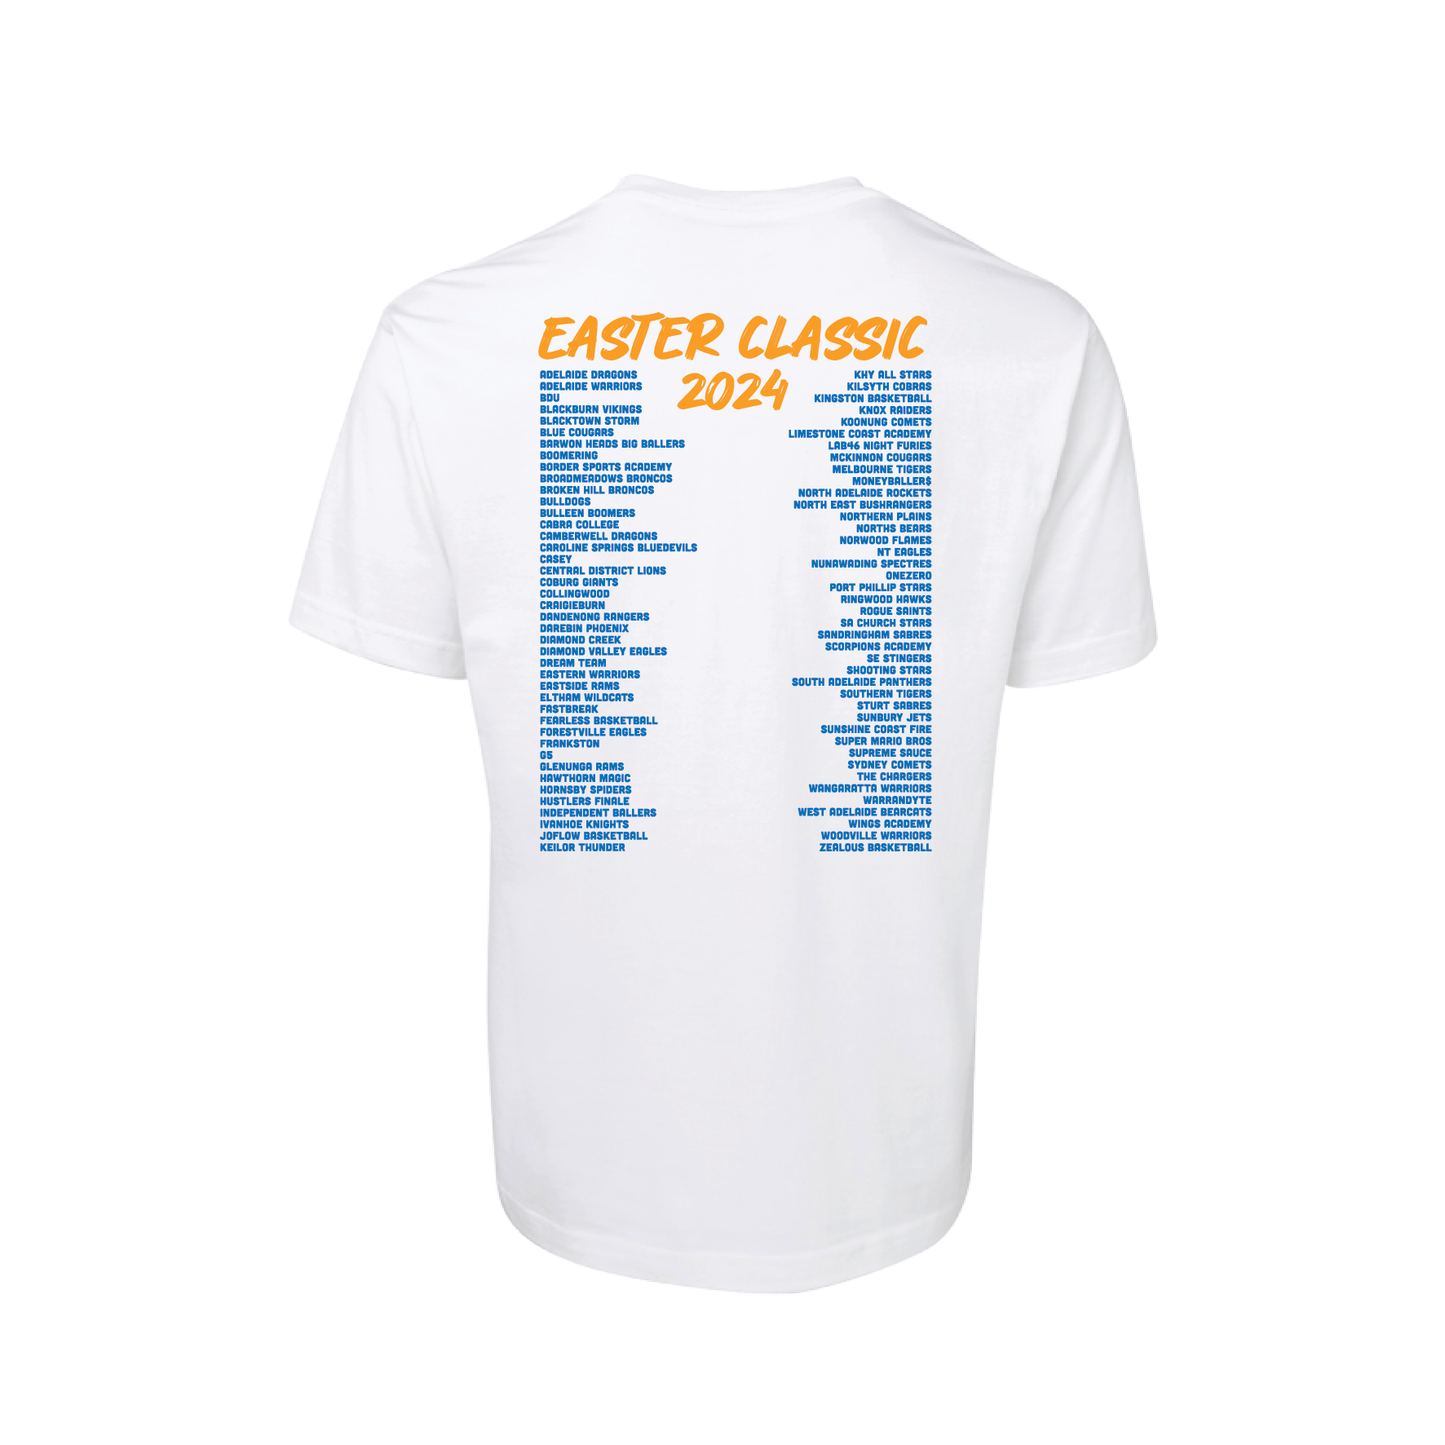 EASTER CLASSIC T-SHIRT WHITE SHORT SLEEVE CLUB NAMES ON BACK (available online only)